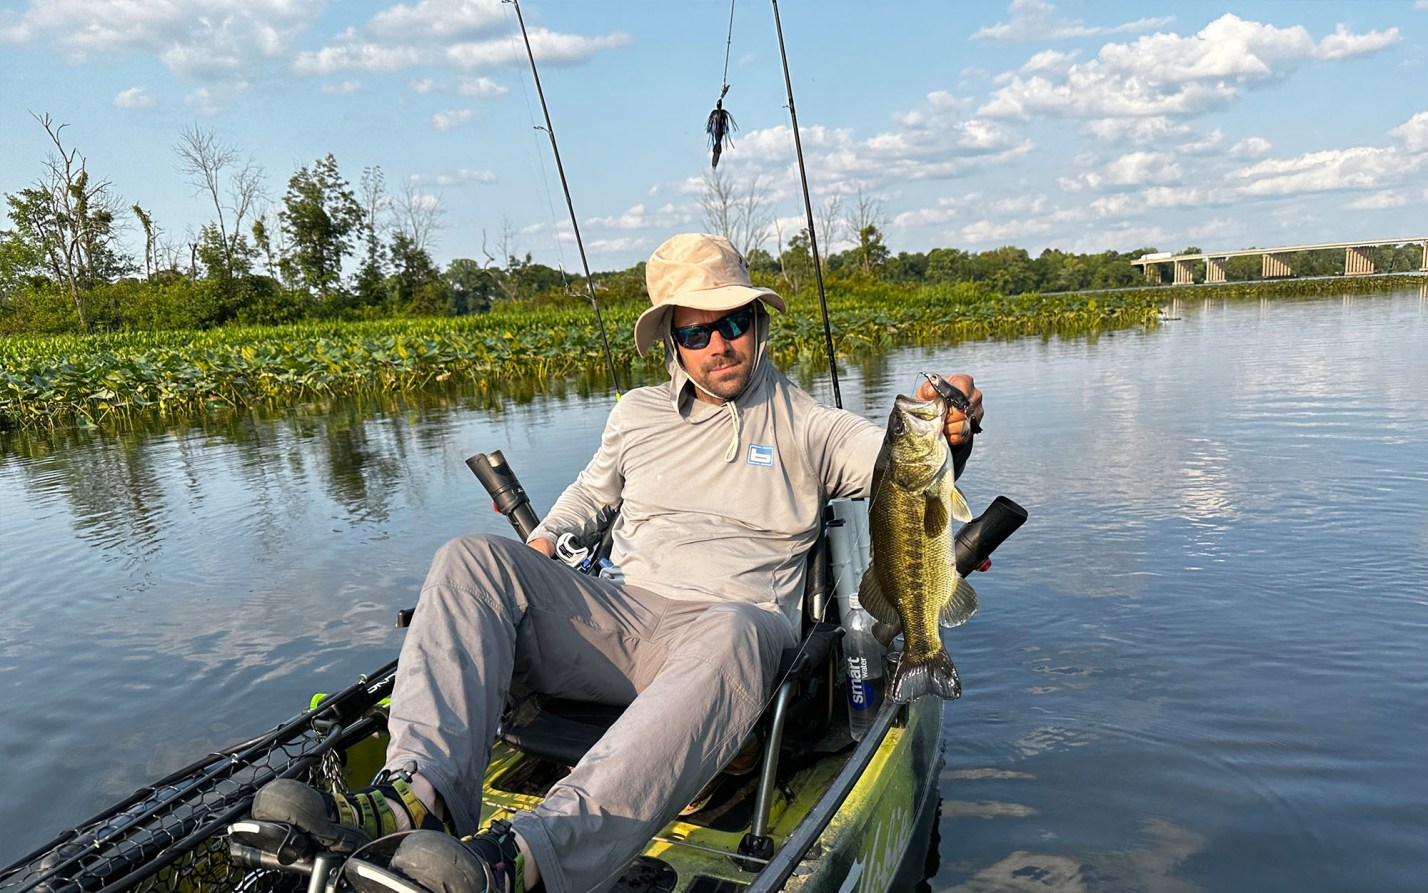 The Best Fishing Rods: Options for Every Angler